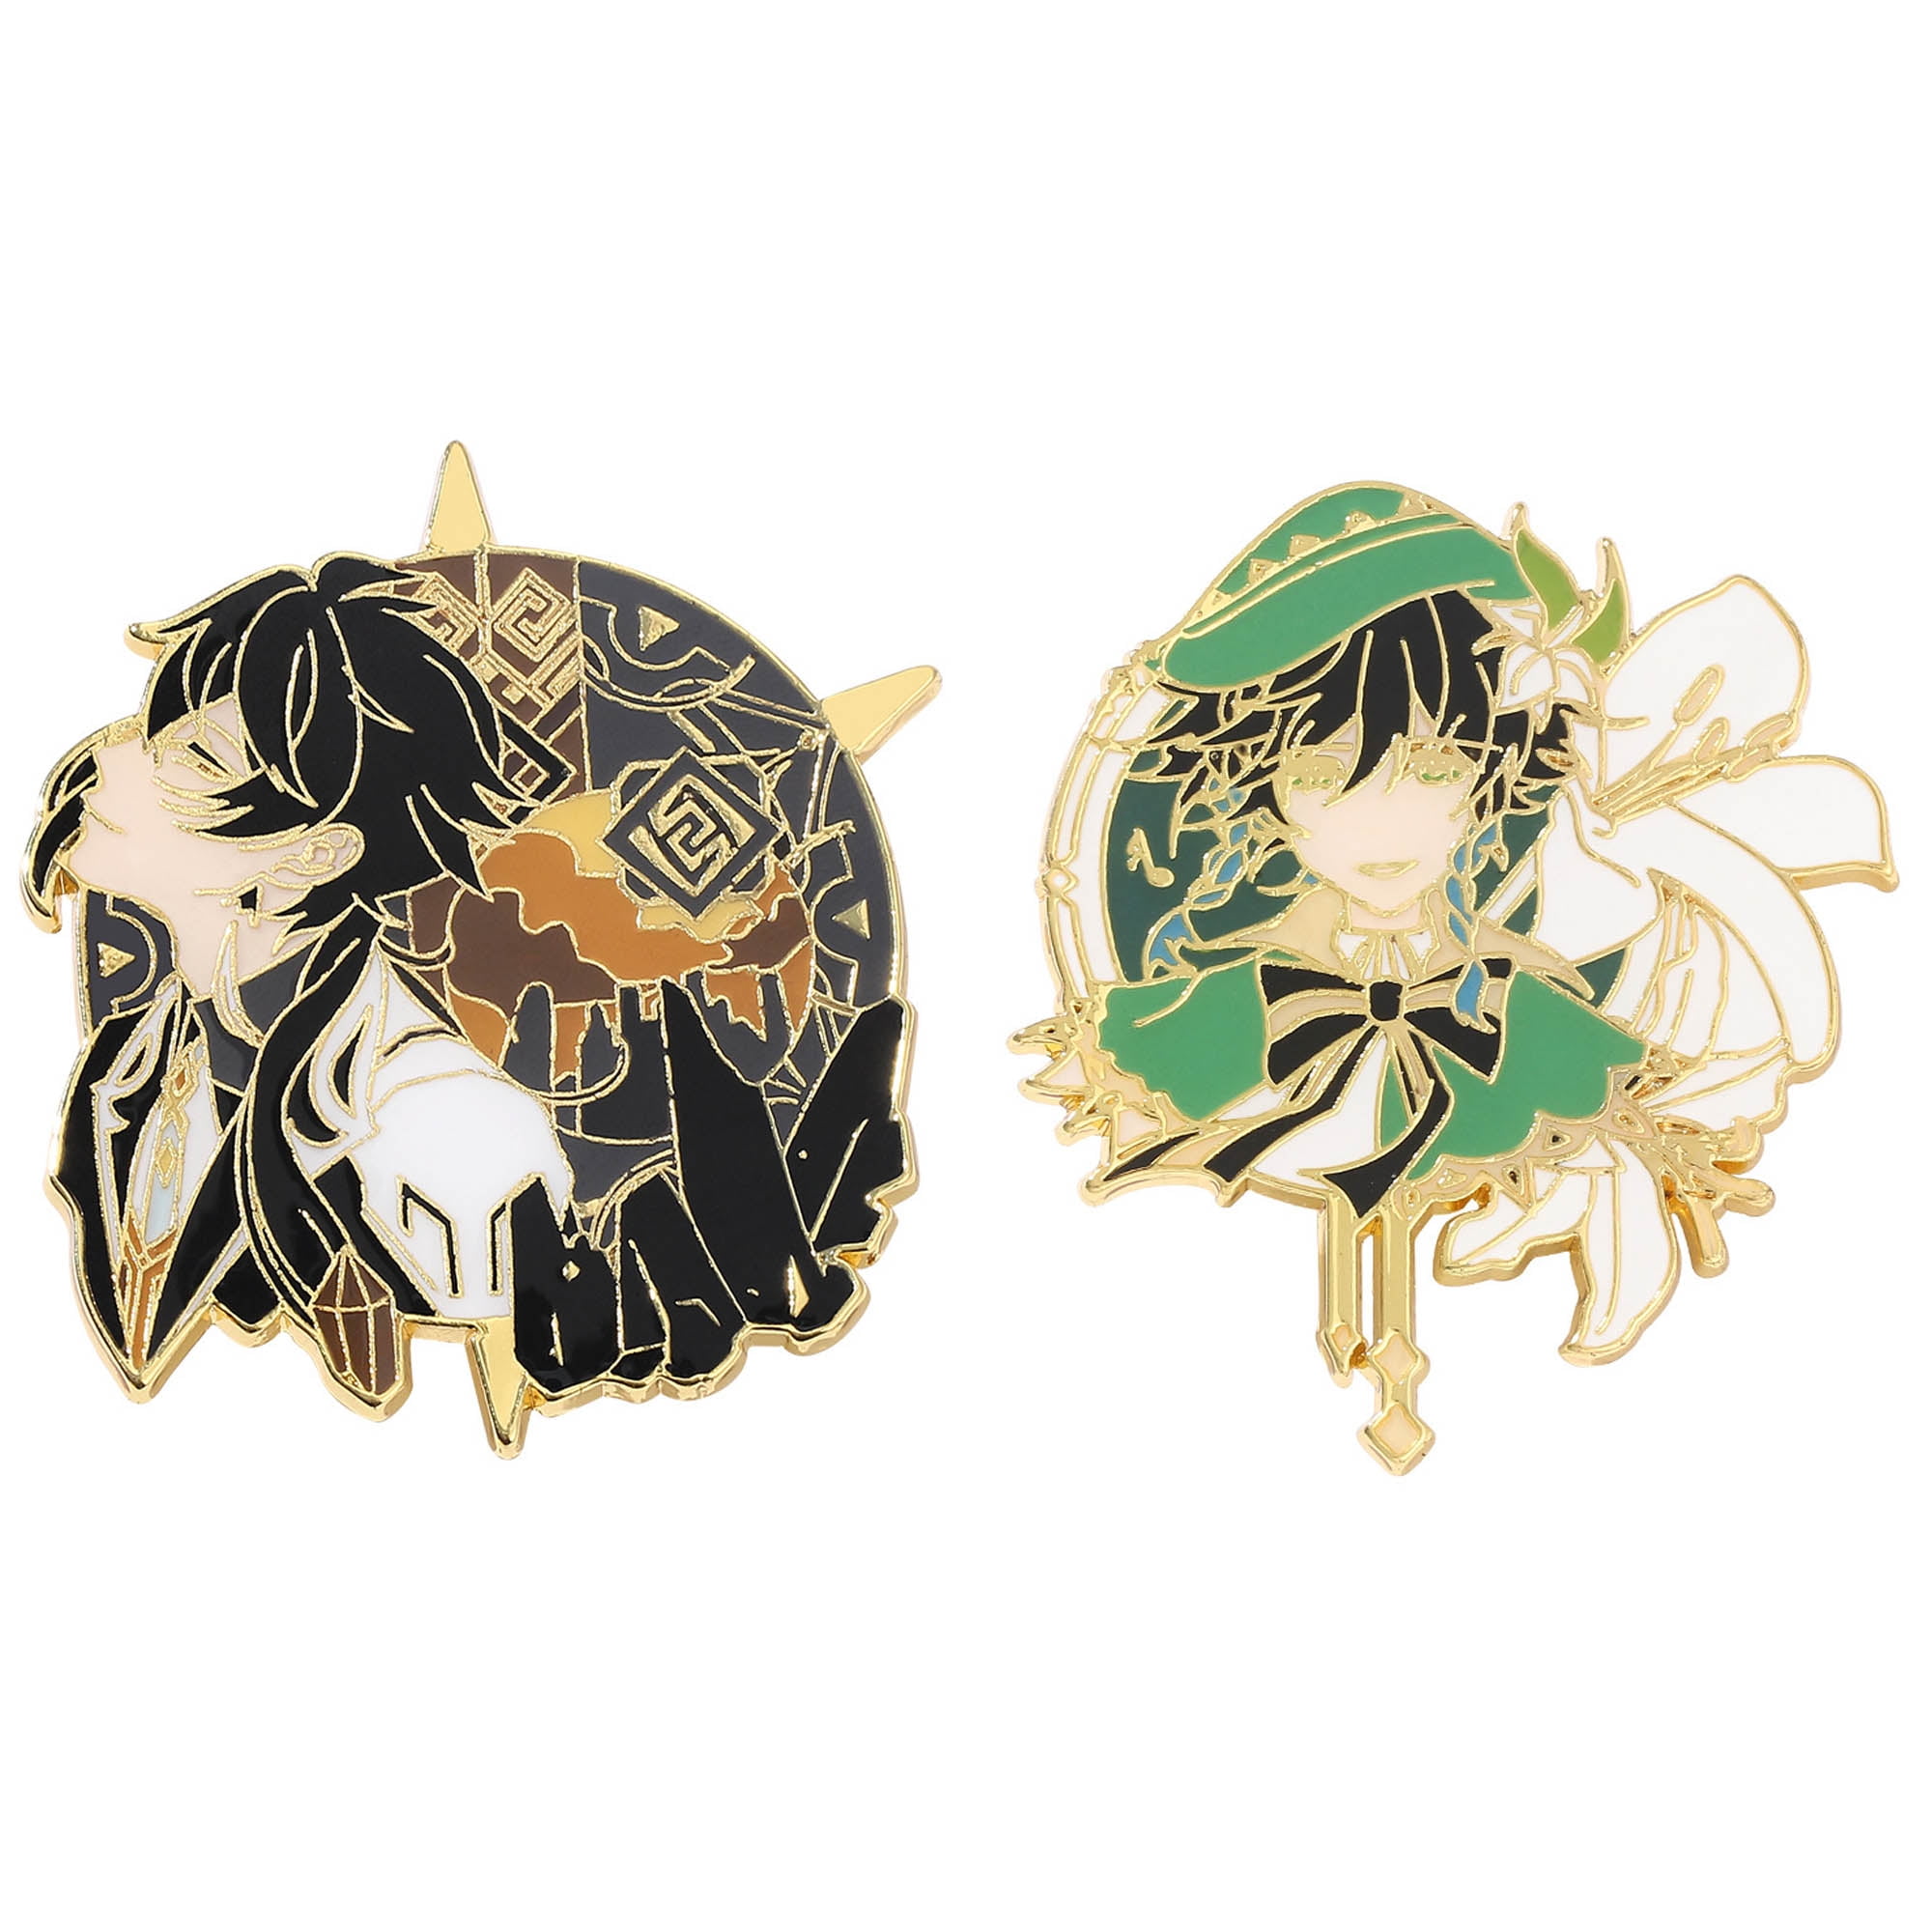 ZILEFSILK 2PCS Anime Game Genshin Impact Figure Eula Xiao Cute Enamel Pins  Set for Jackets Backpack Bag Hat Characters Cosplay Metal Lapel Badges Pins  Aesthetic Brooch For Women Girls Fans 